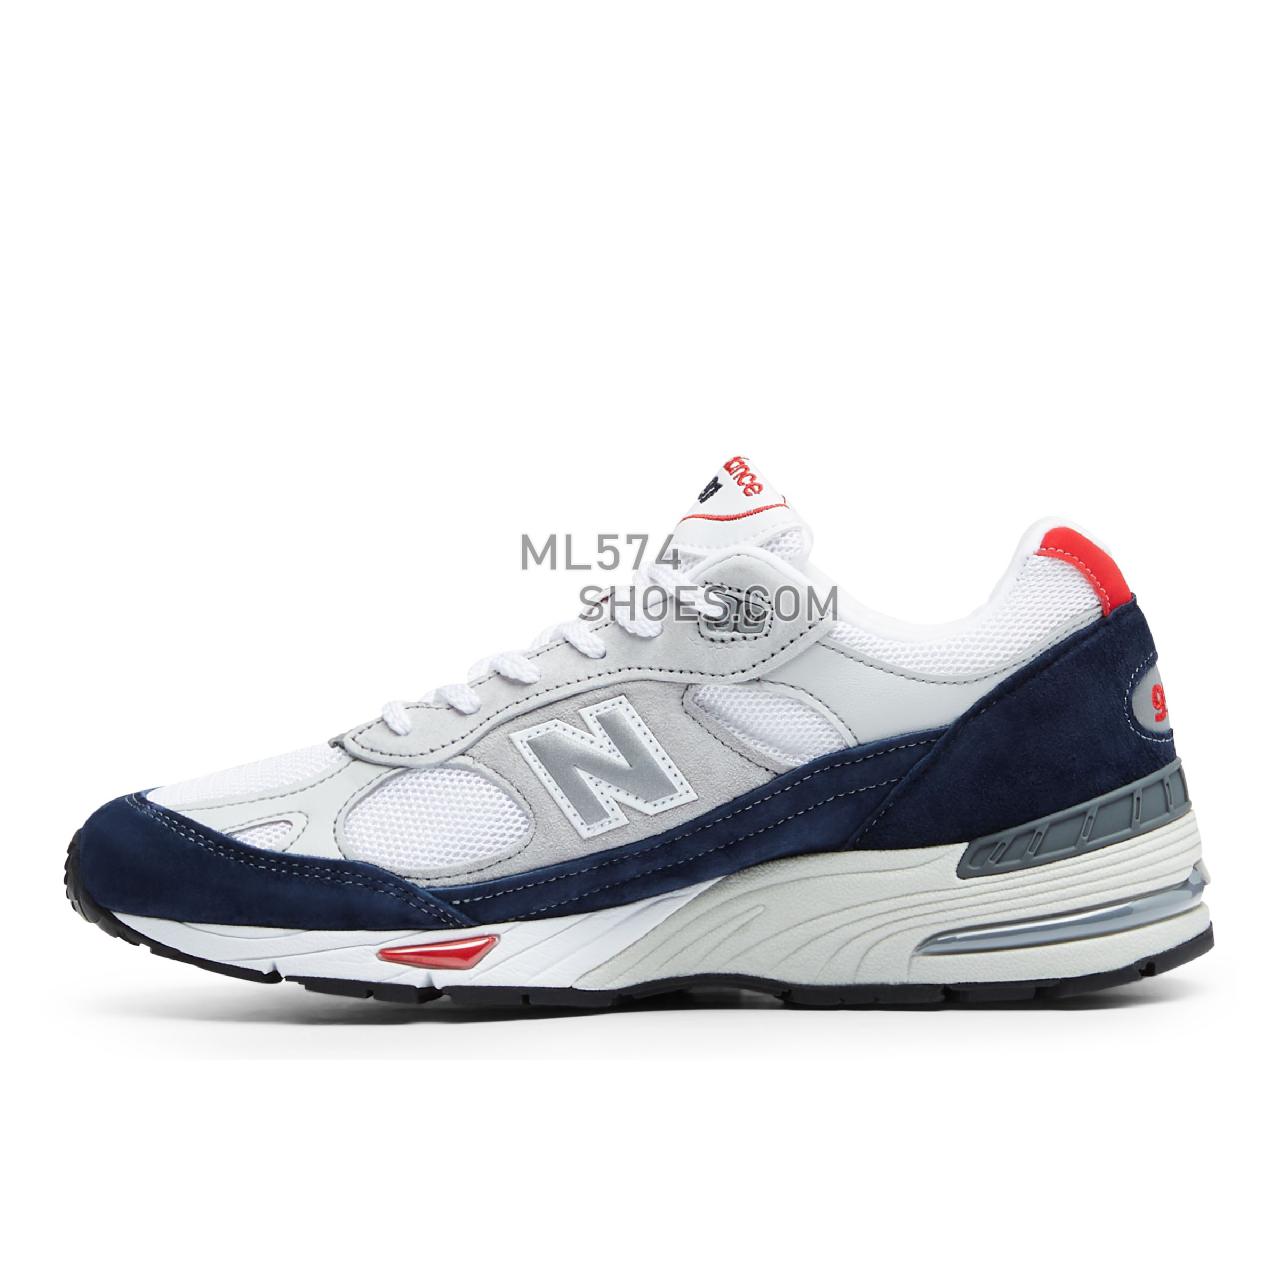 New Balance Made in UK 991 - Men's Made in USA And UK Sneakers - Blue with Grey and White - M991GWR